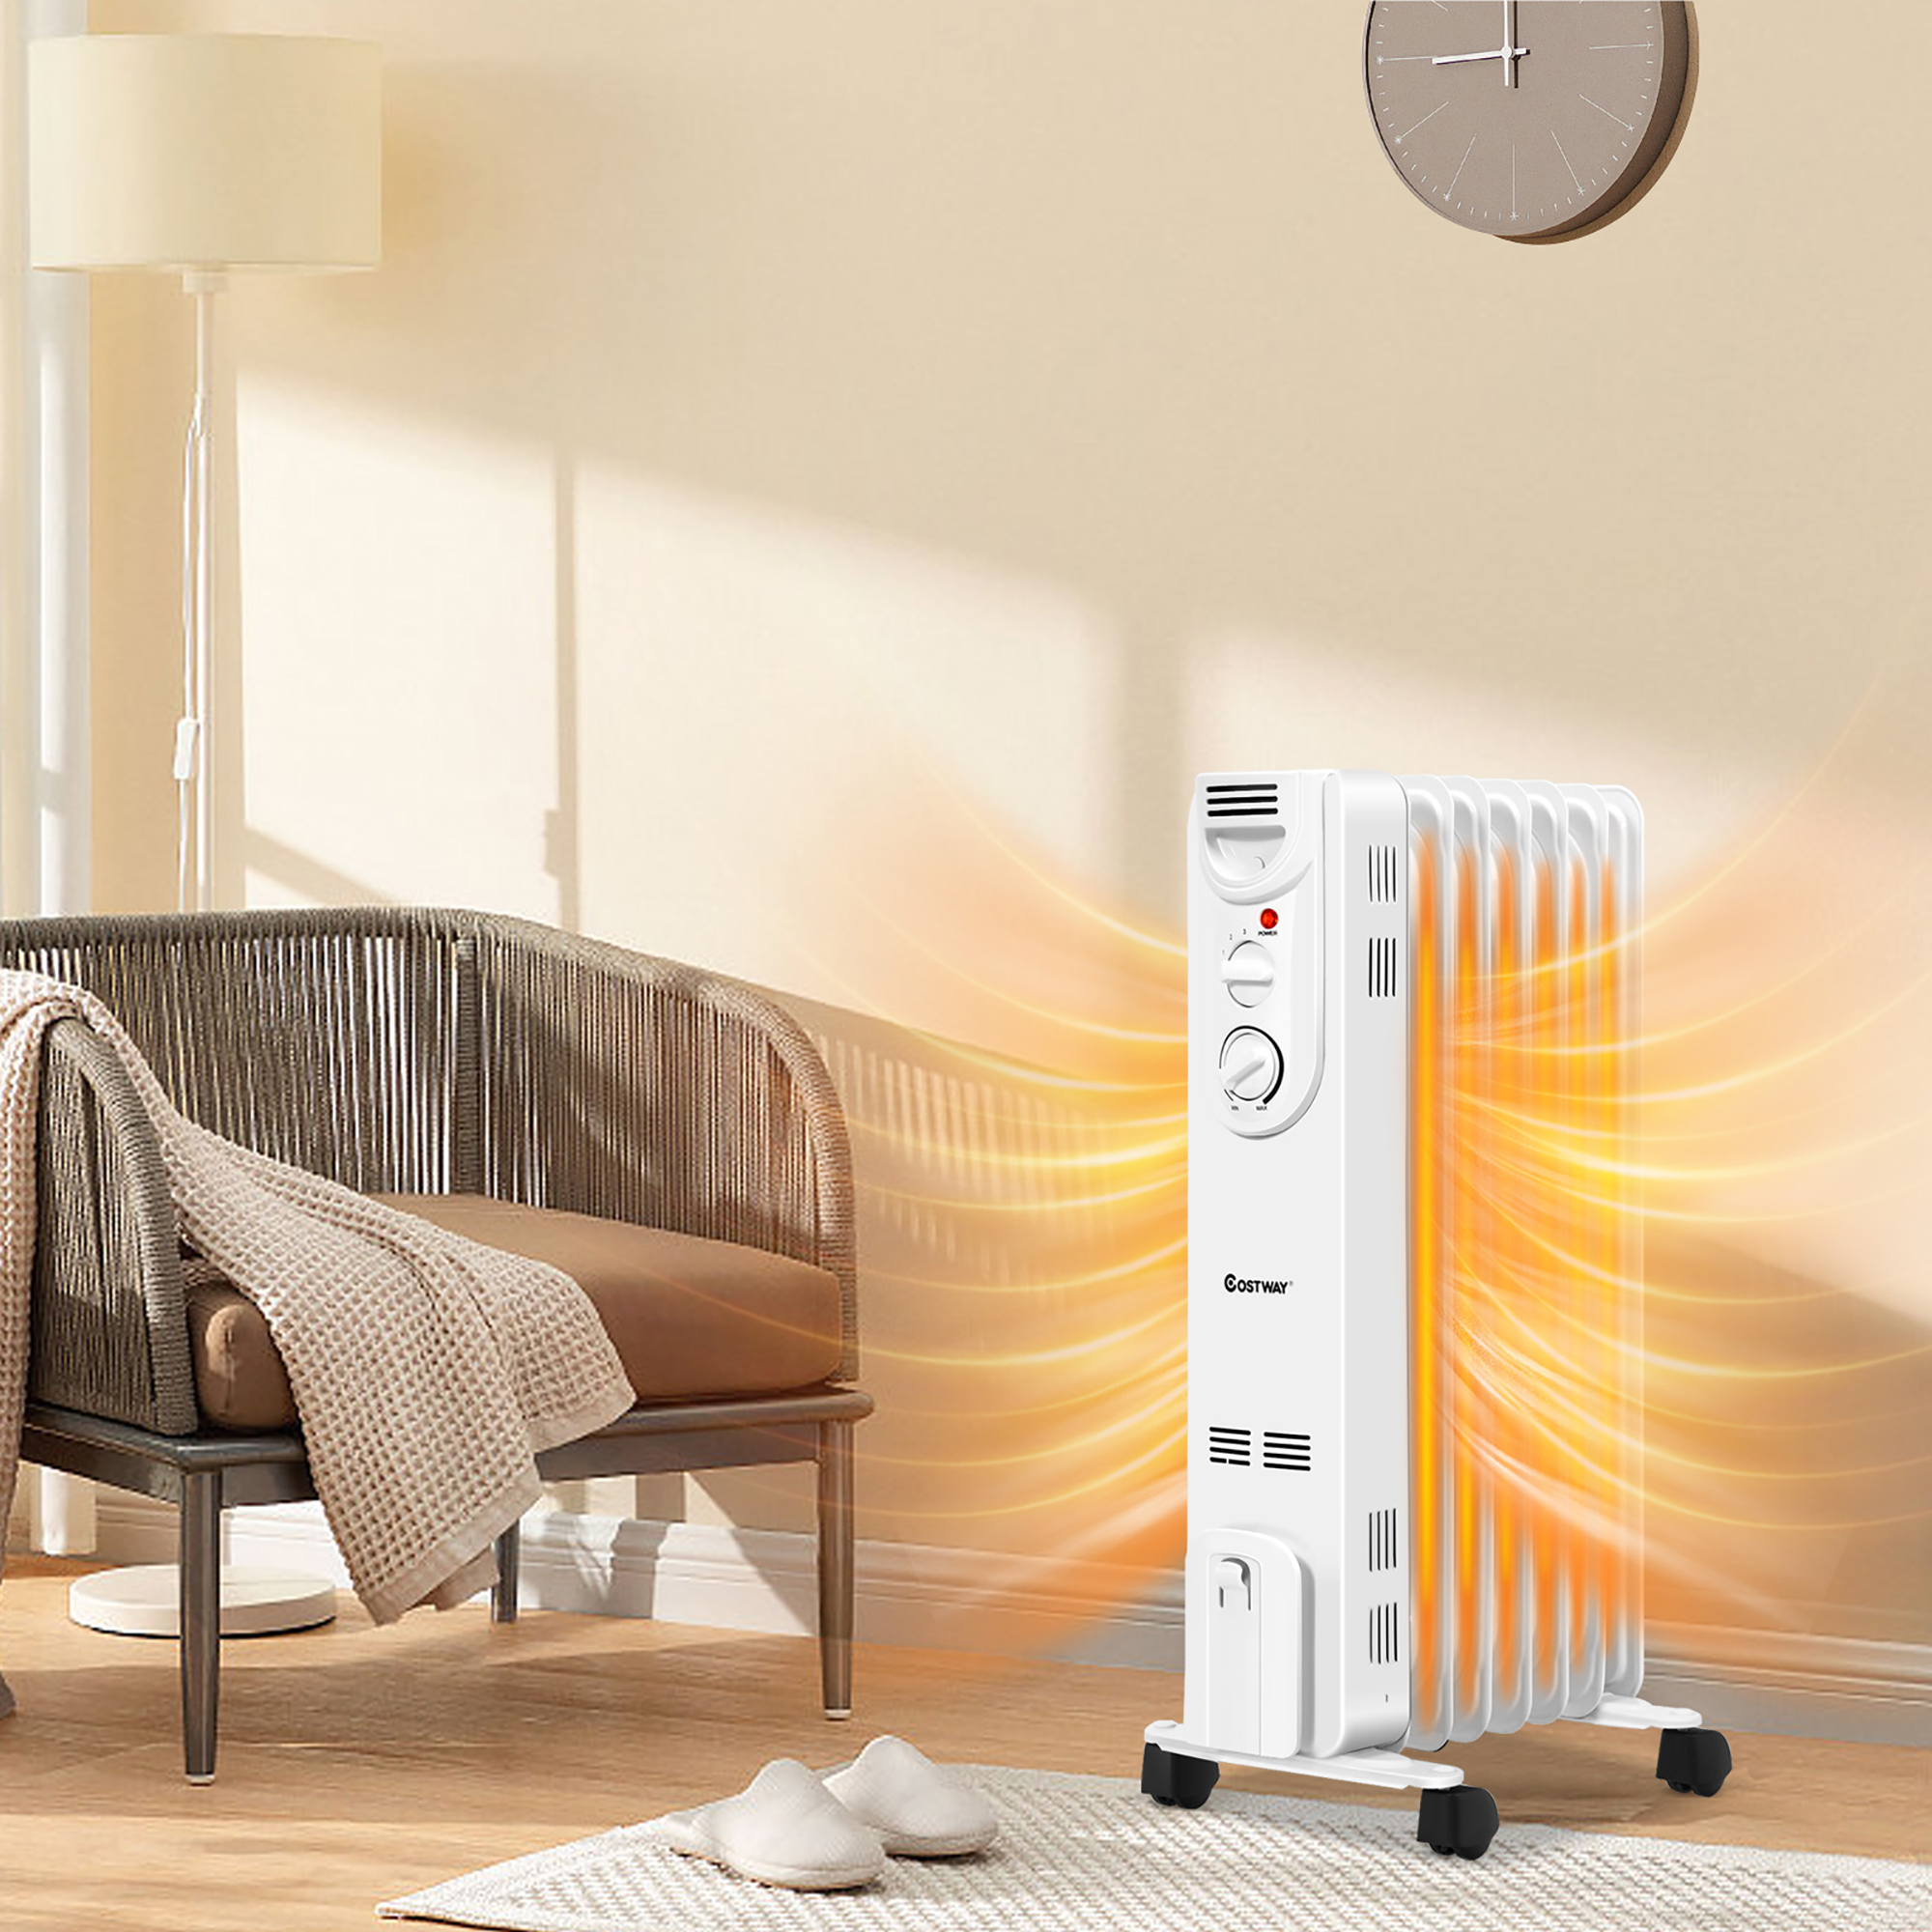 Costway 1500W Electric Oil Filled Radiator Space Heater 5-Fin Thermostat Room Radiant - image 3 of 10